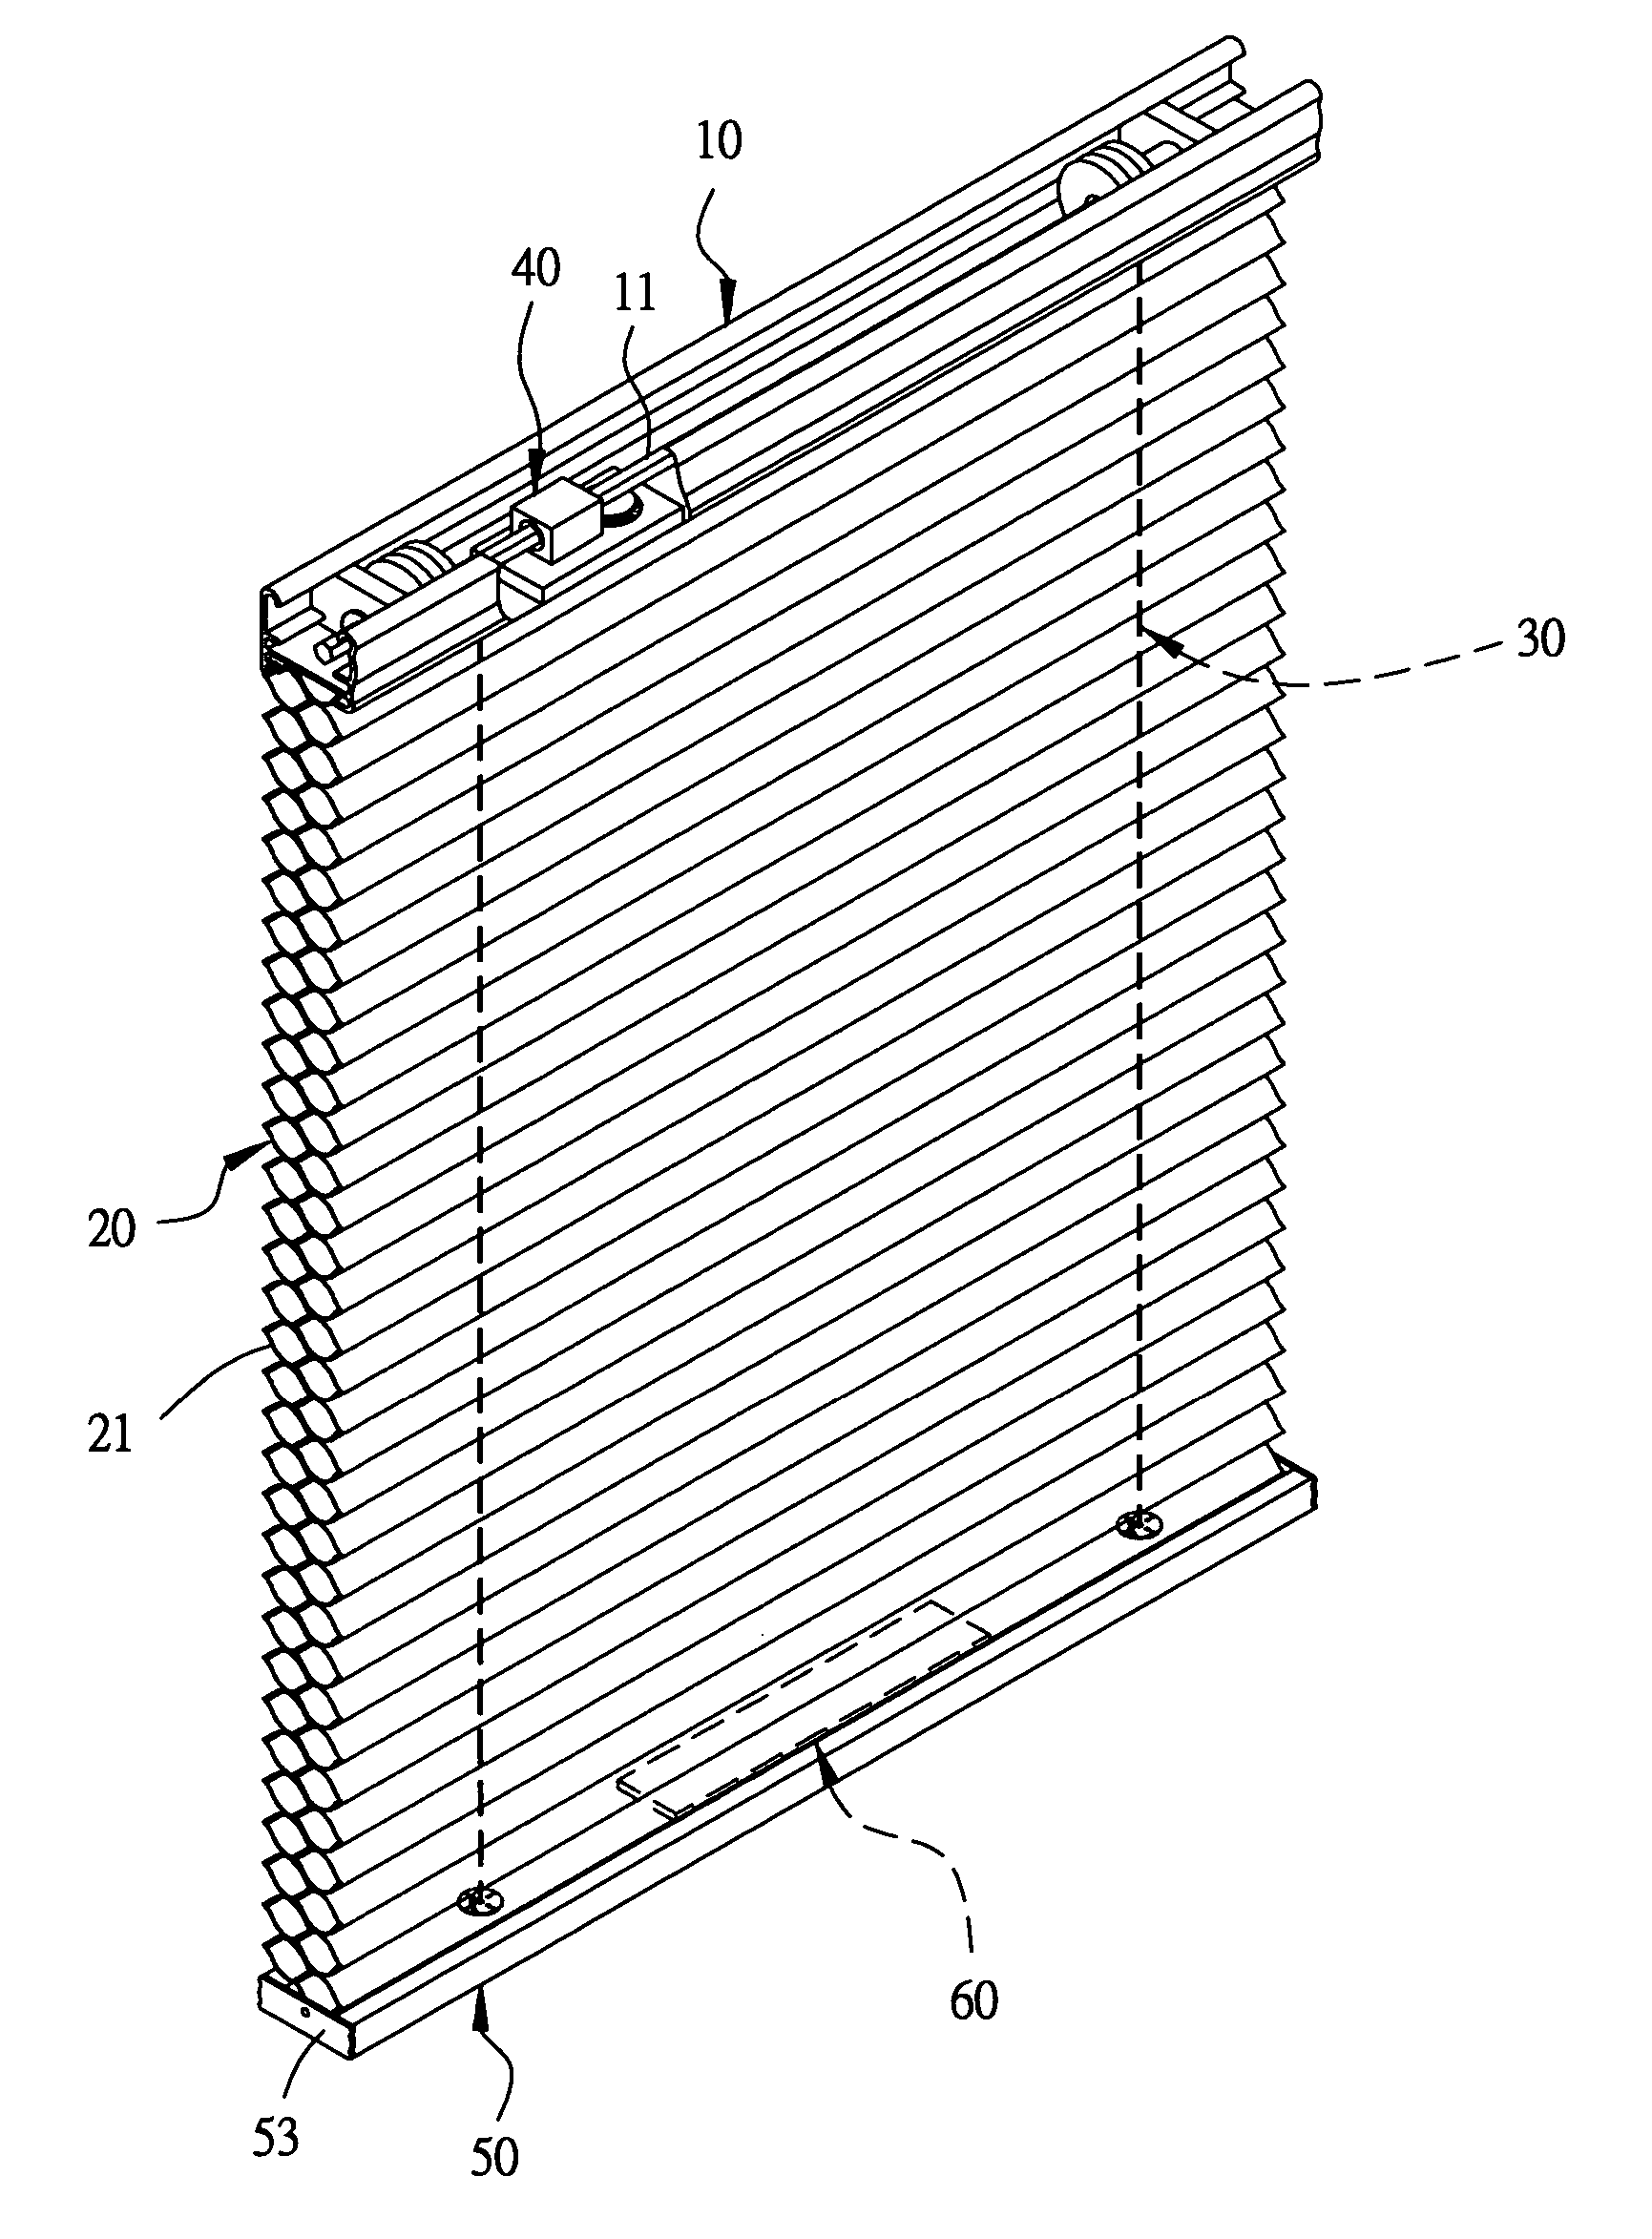 Equilibrium device for a blind without pull cords